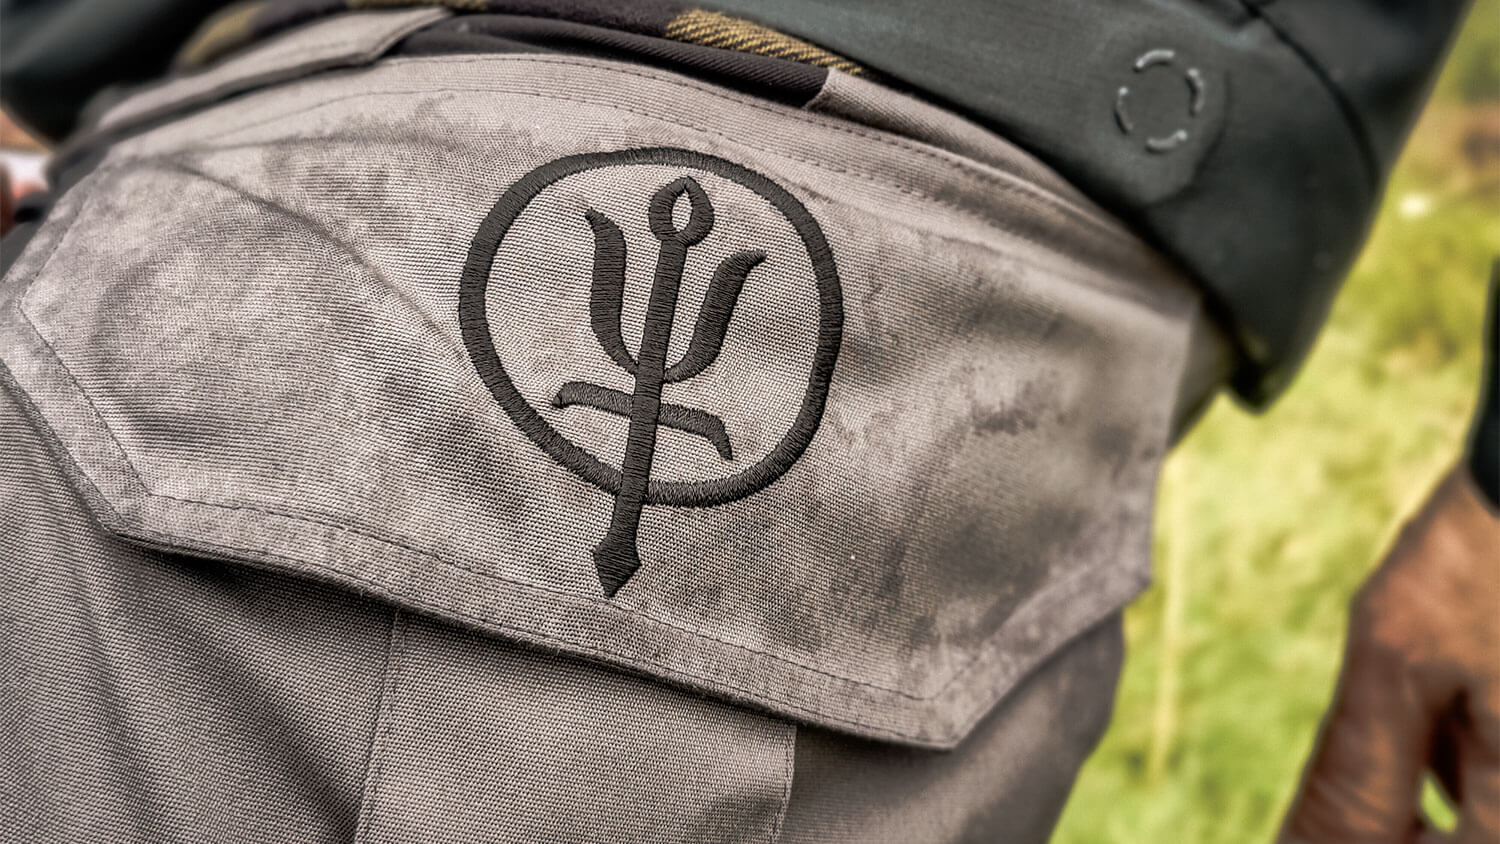 The ThruDark Charge outdoor trousers | Review